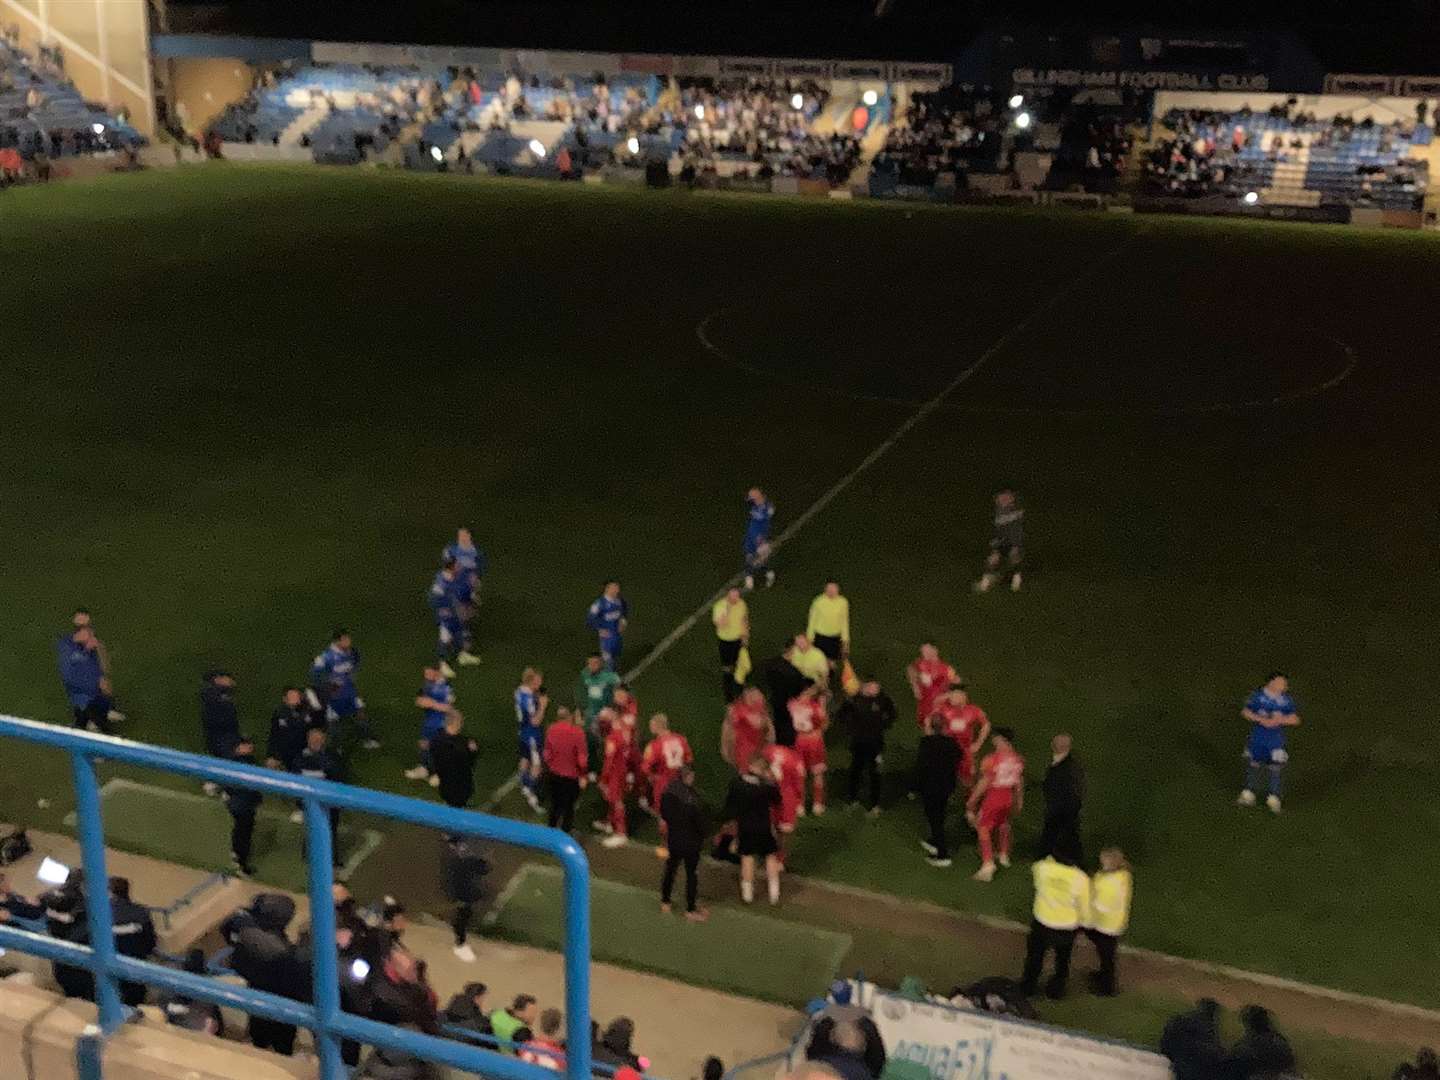 The players await instructions as the lights go out at Priestfield